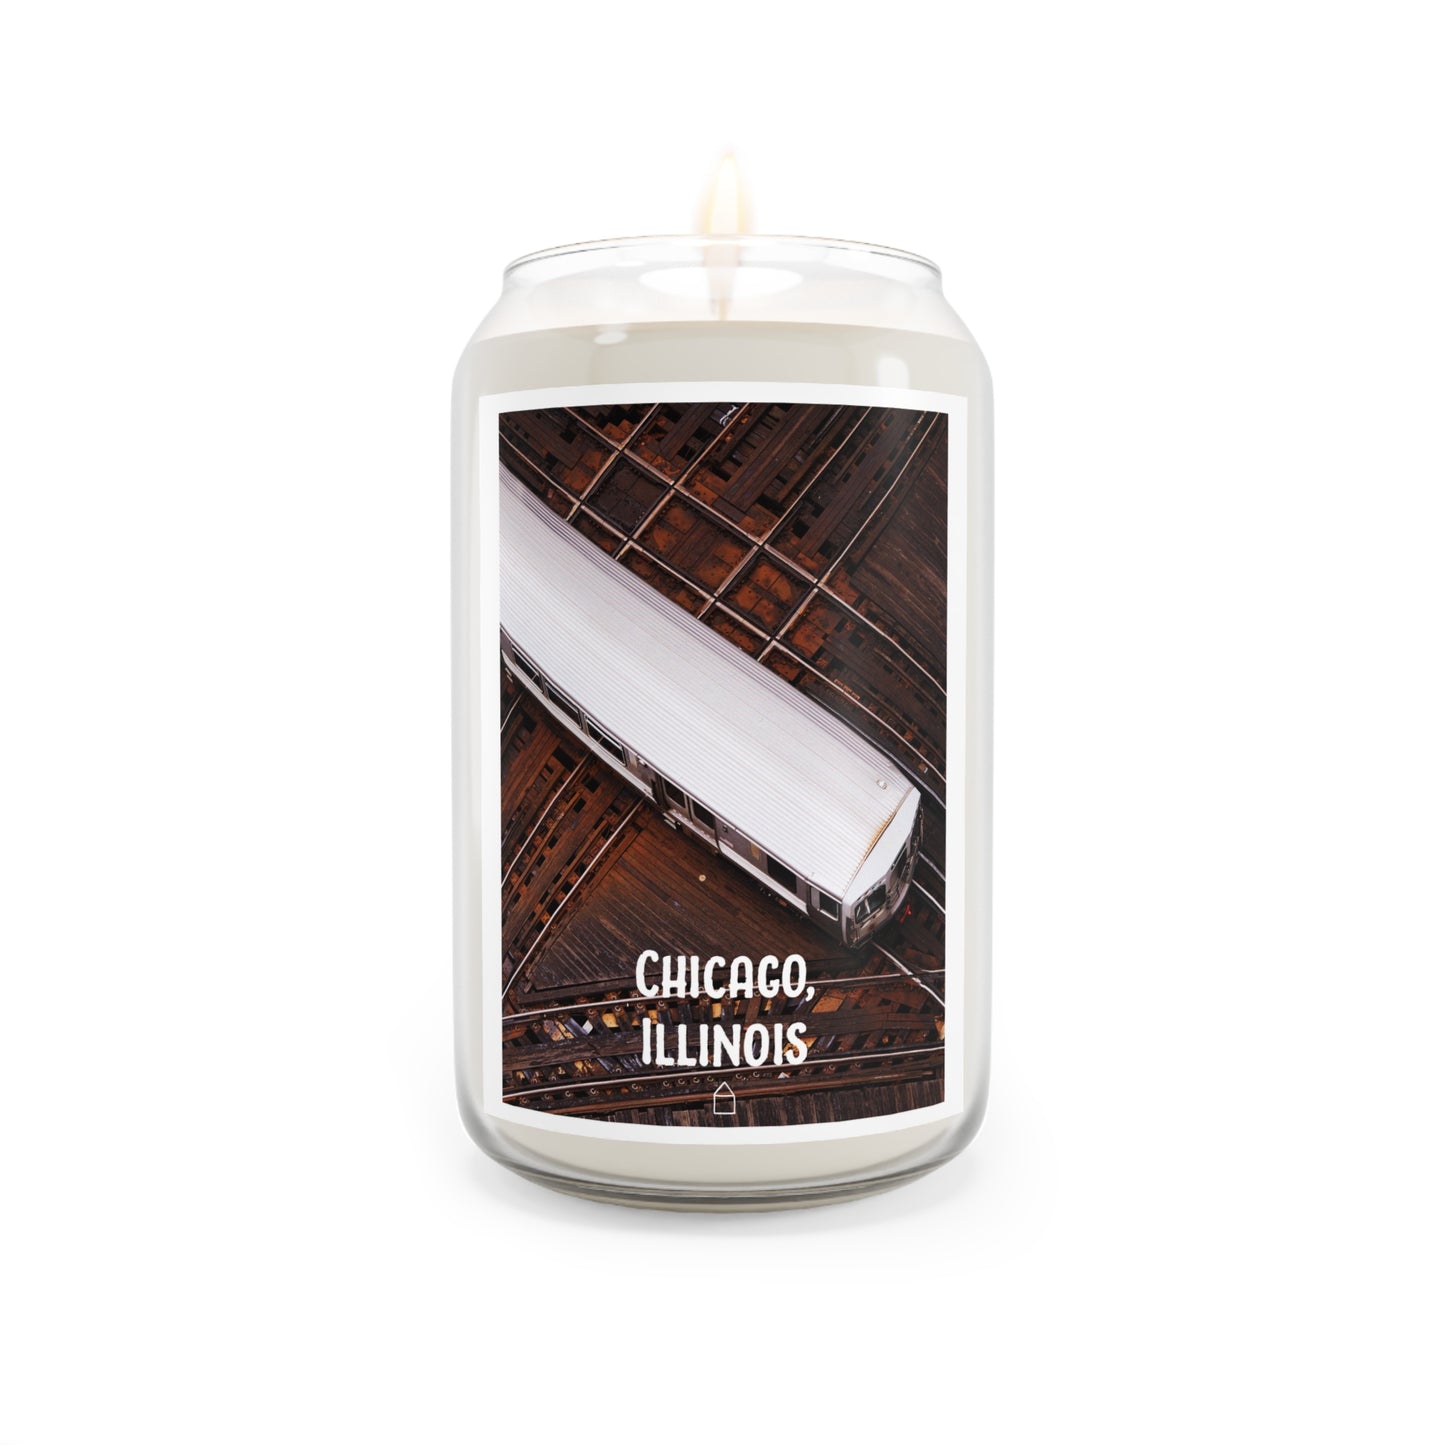 Chicago, Illinois (#022) - Home Town Candles, 13.75oz